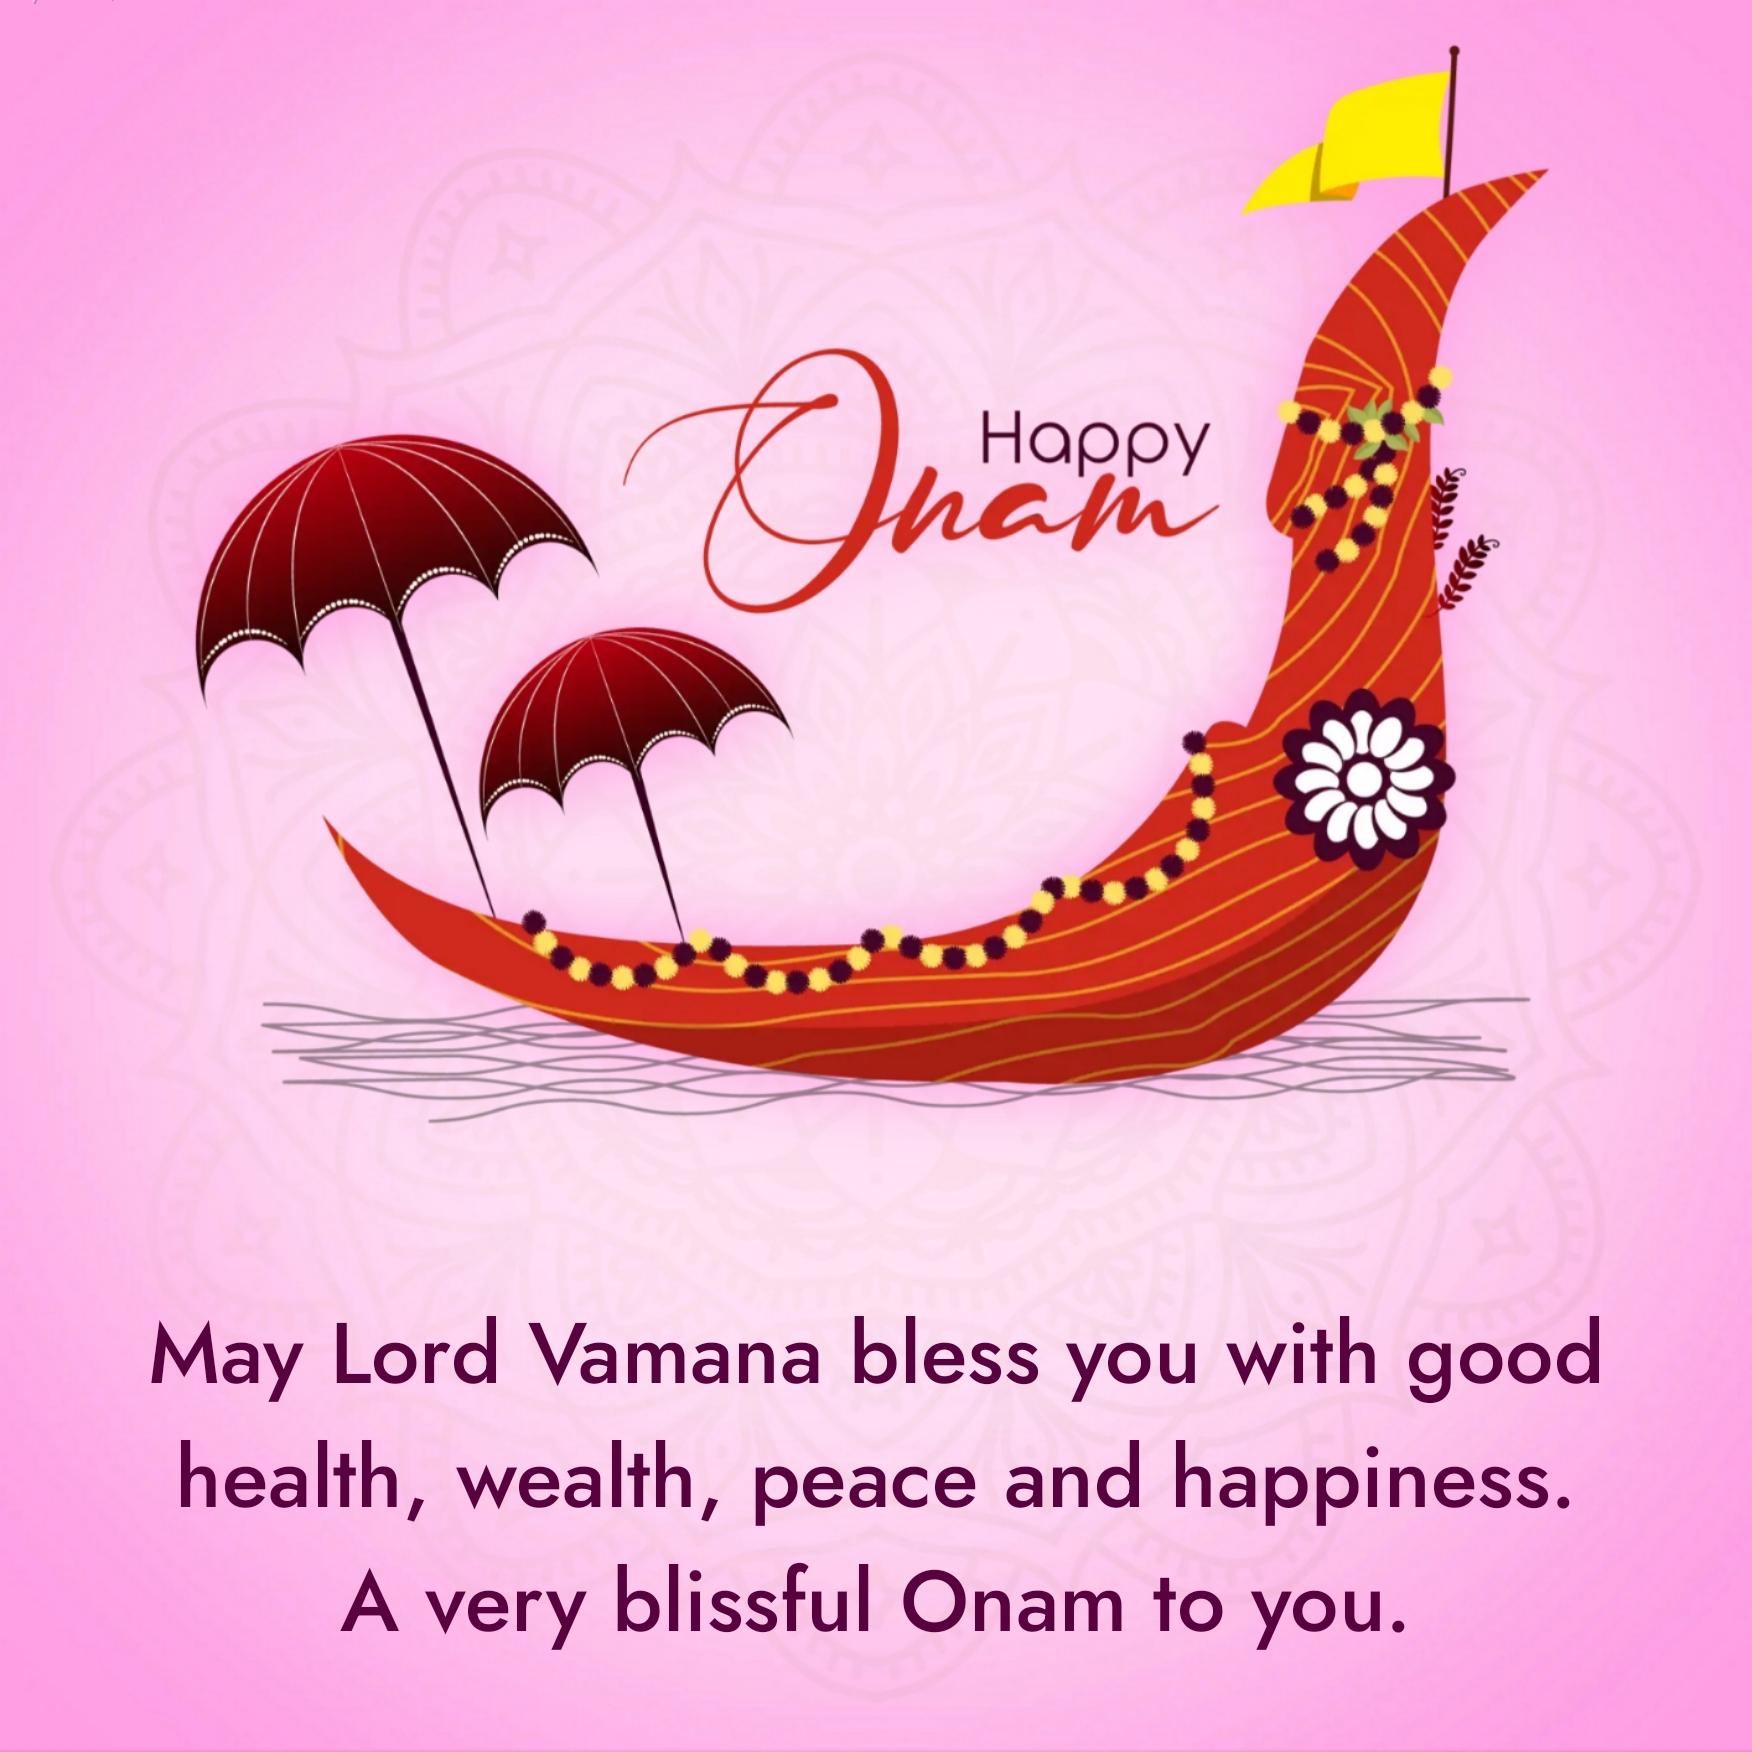 May Lord Vamana bless you with good health wealth peace